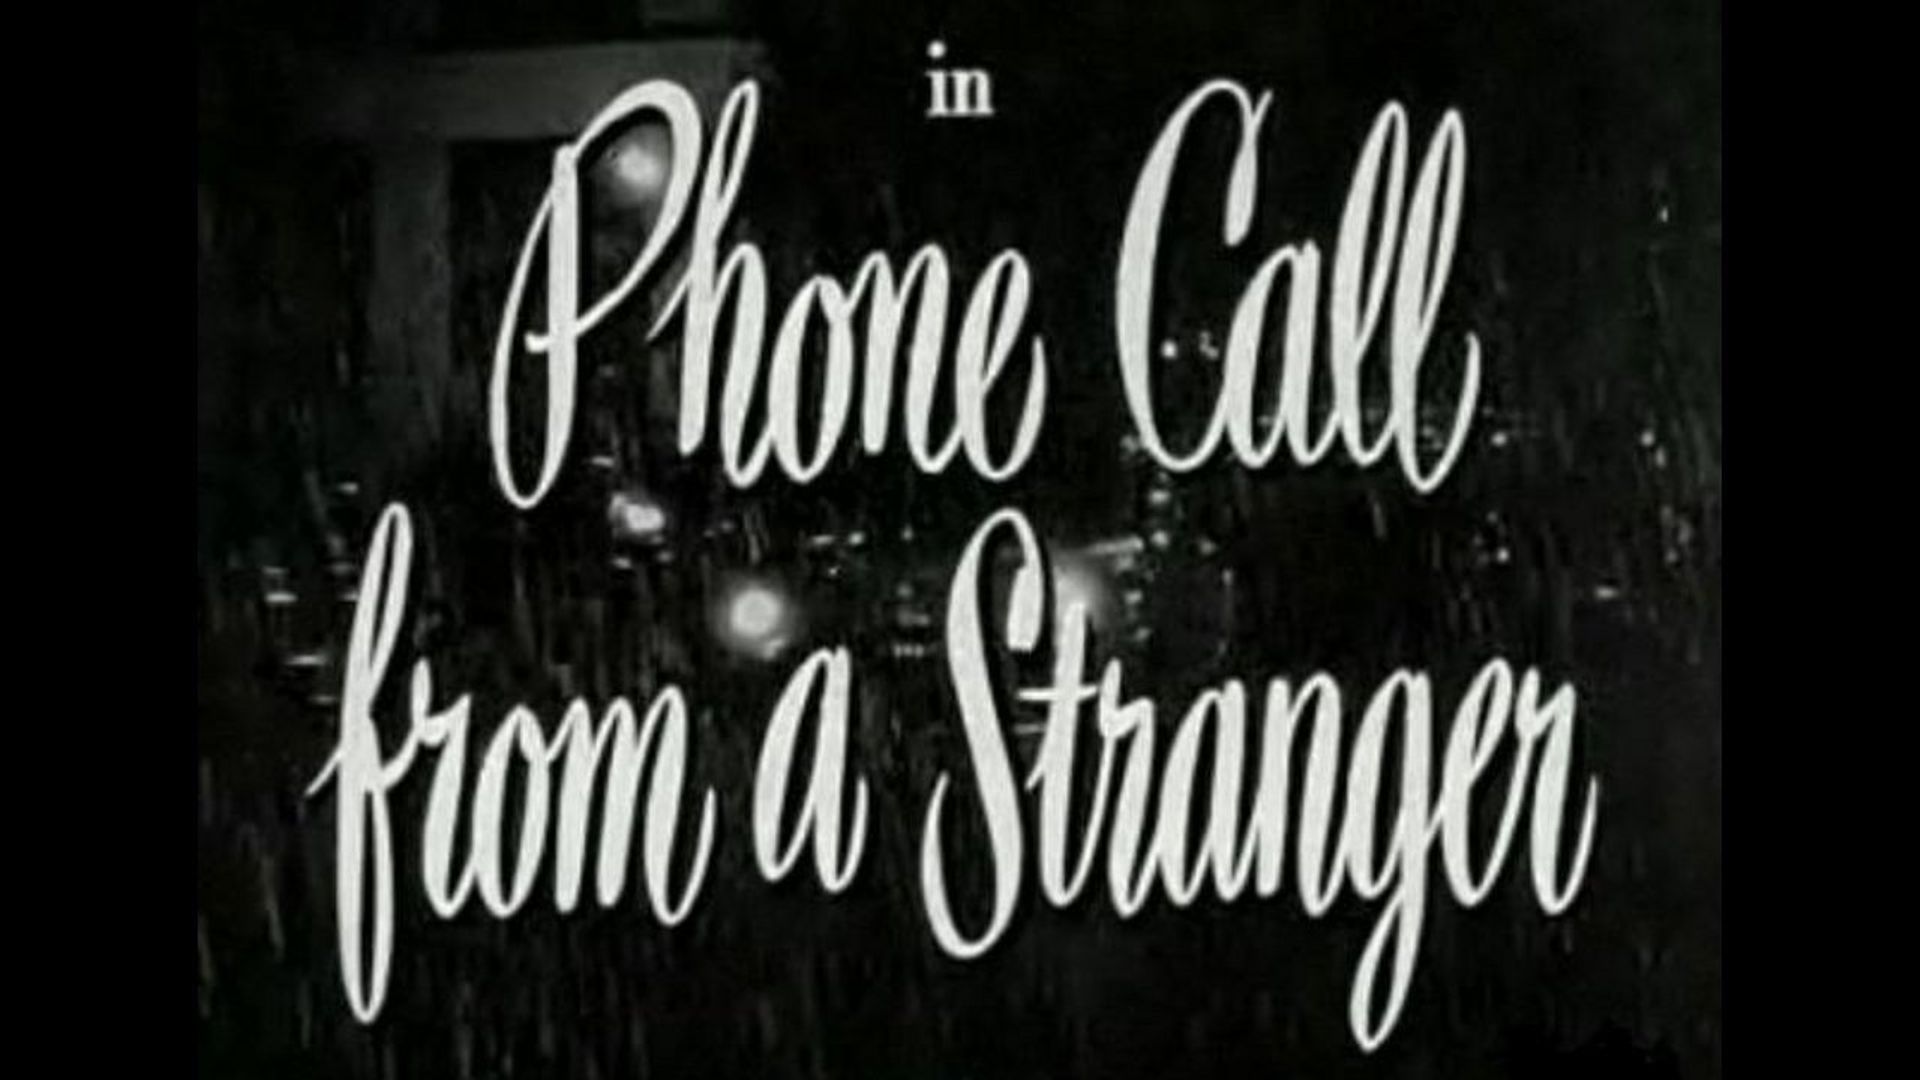 Phone Call from a Stranger Backdrop